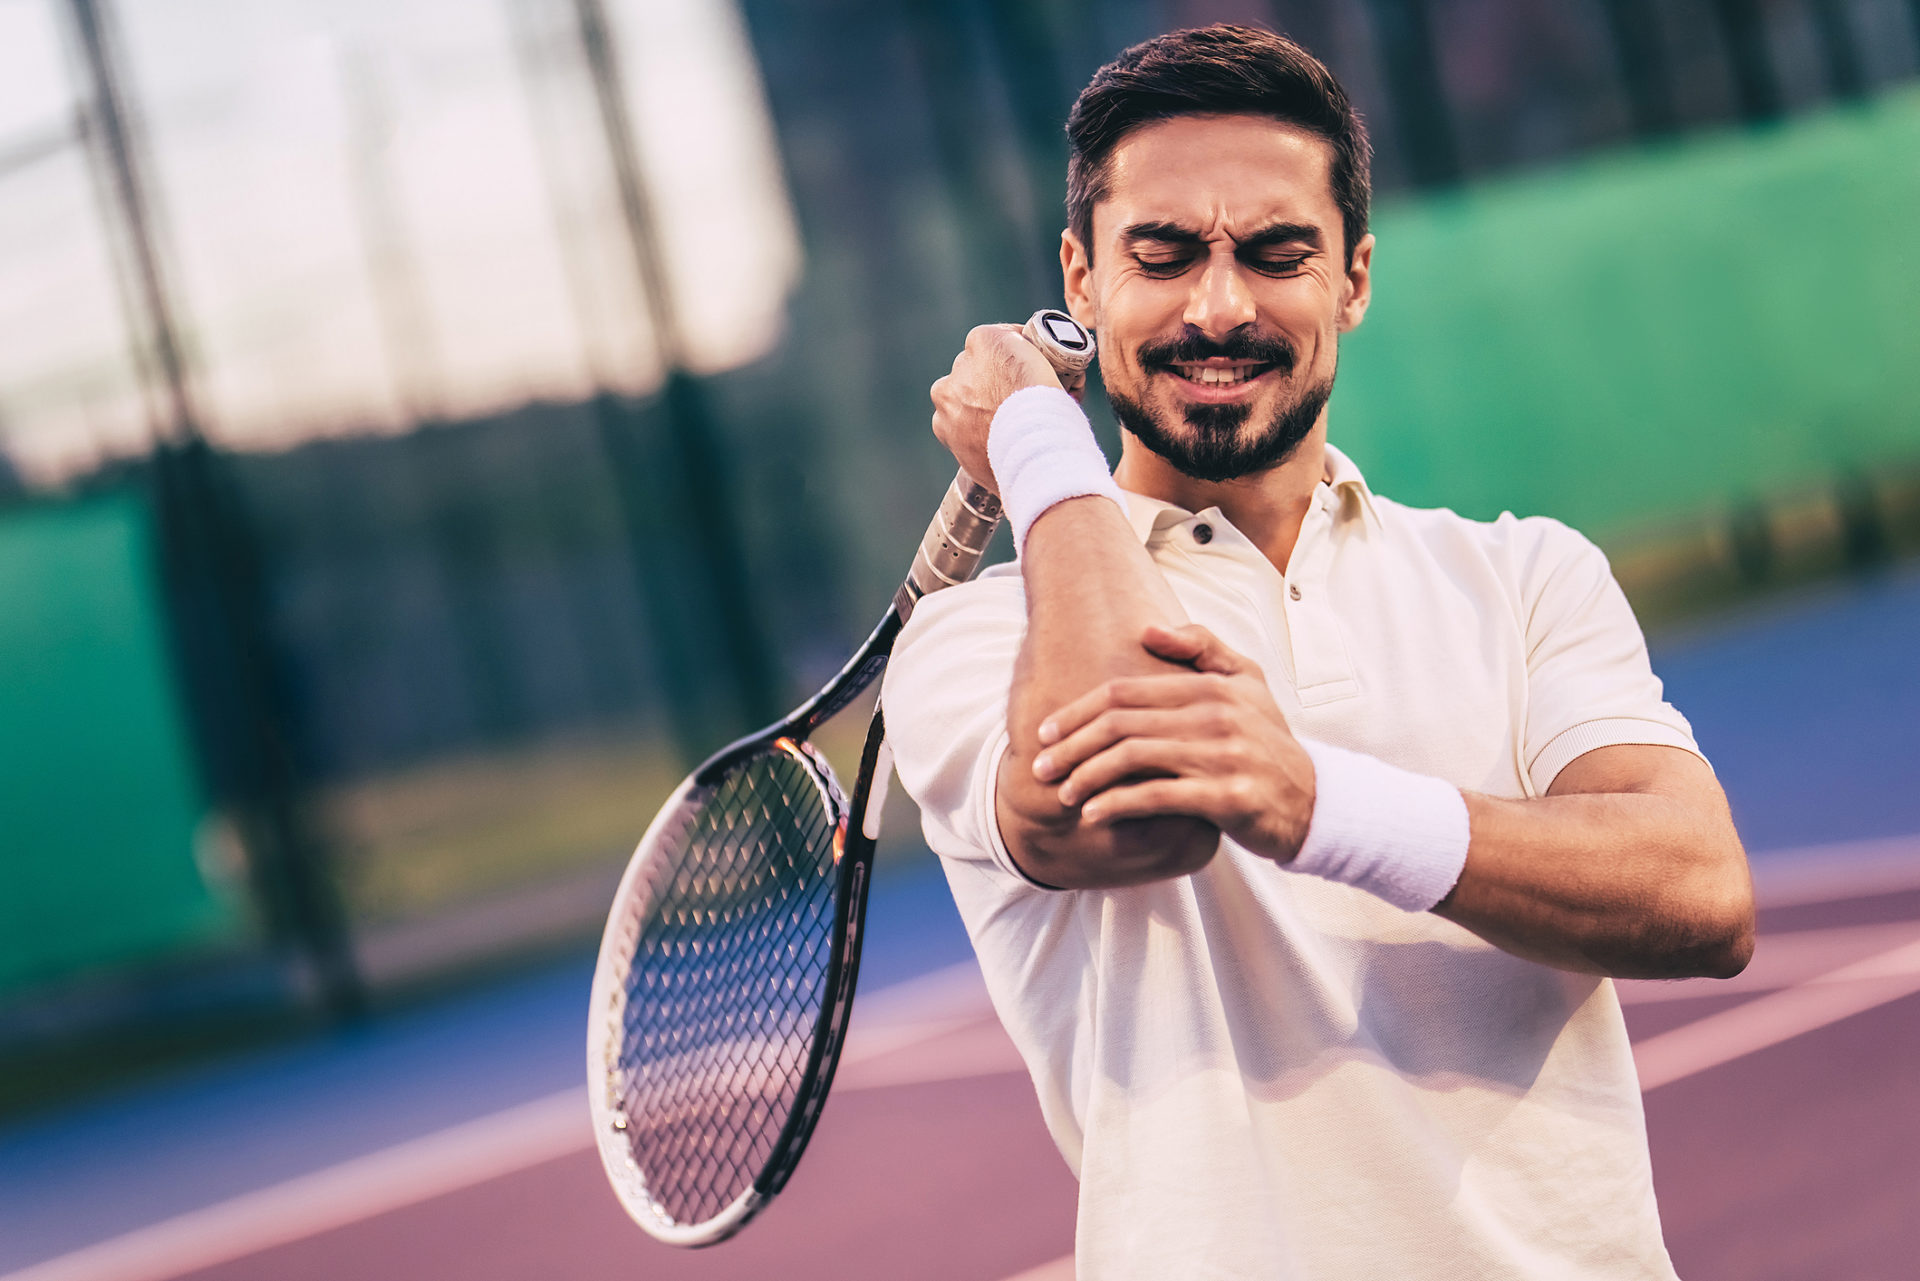 Man experiencing pain and discomfrot due to Tennis Elbow